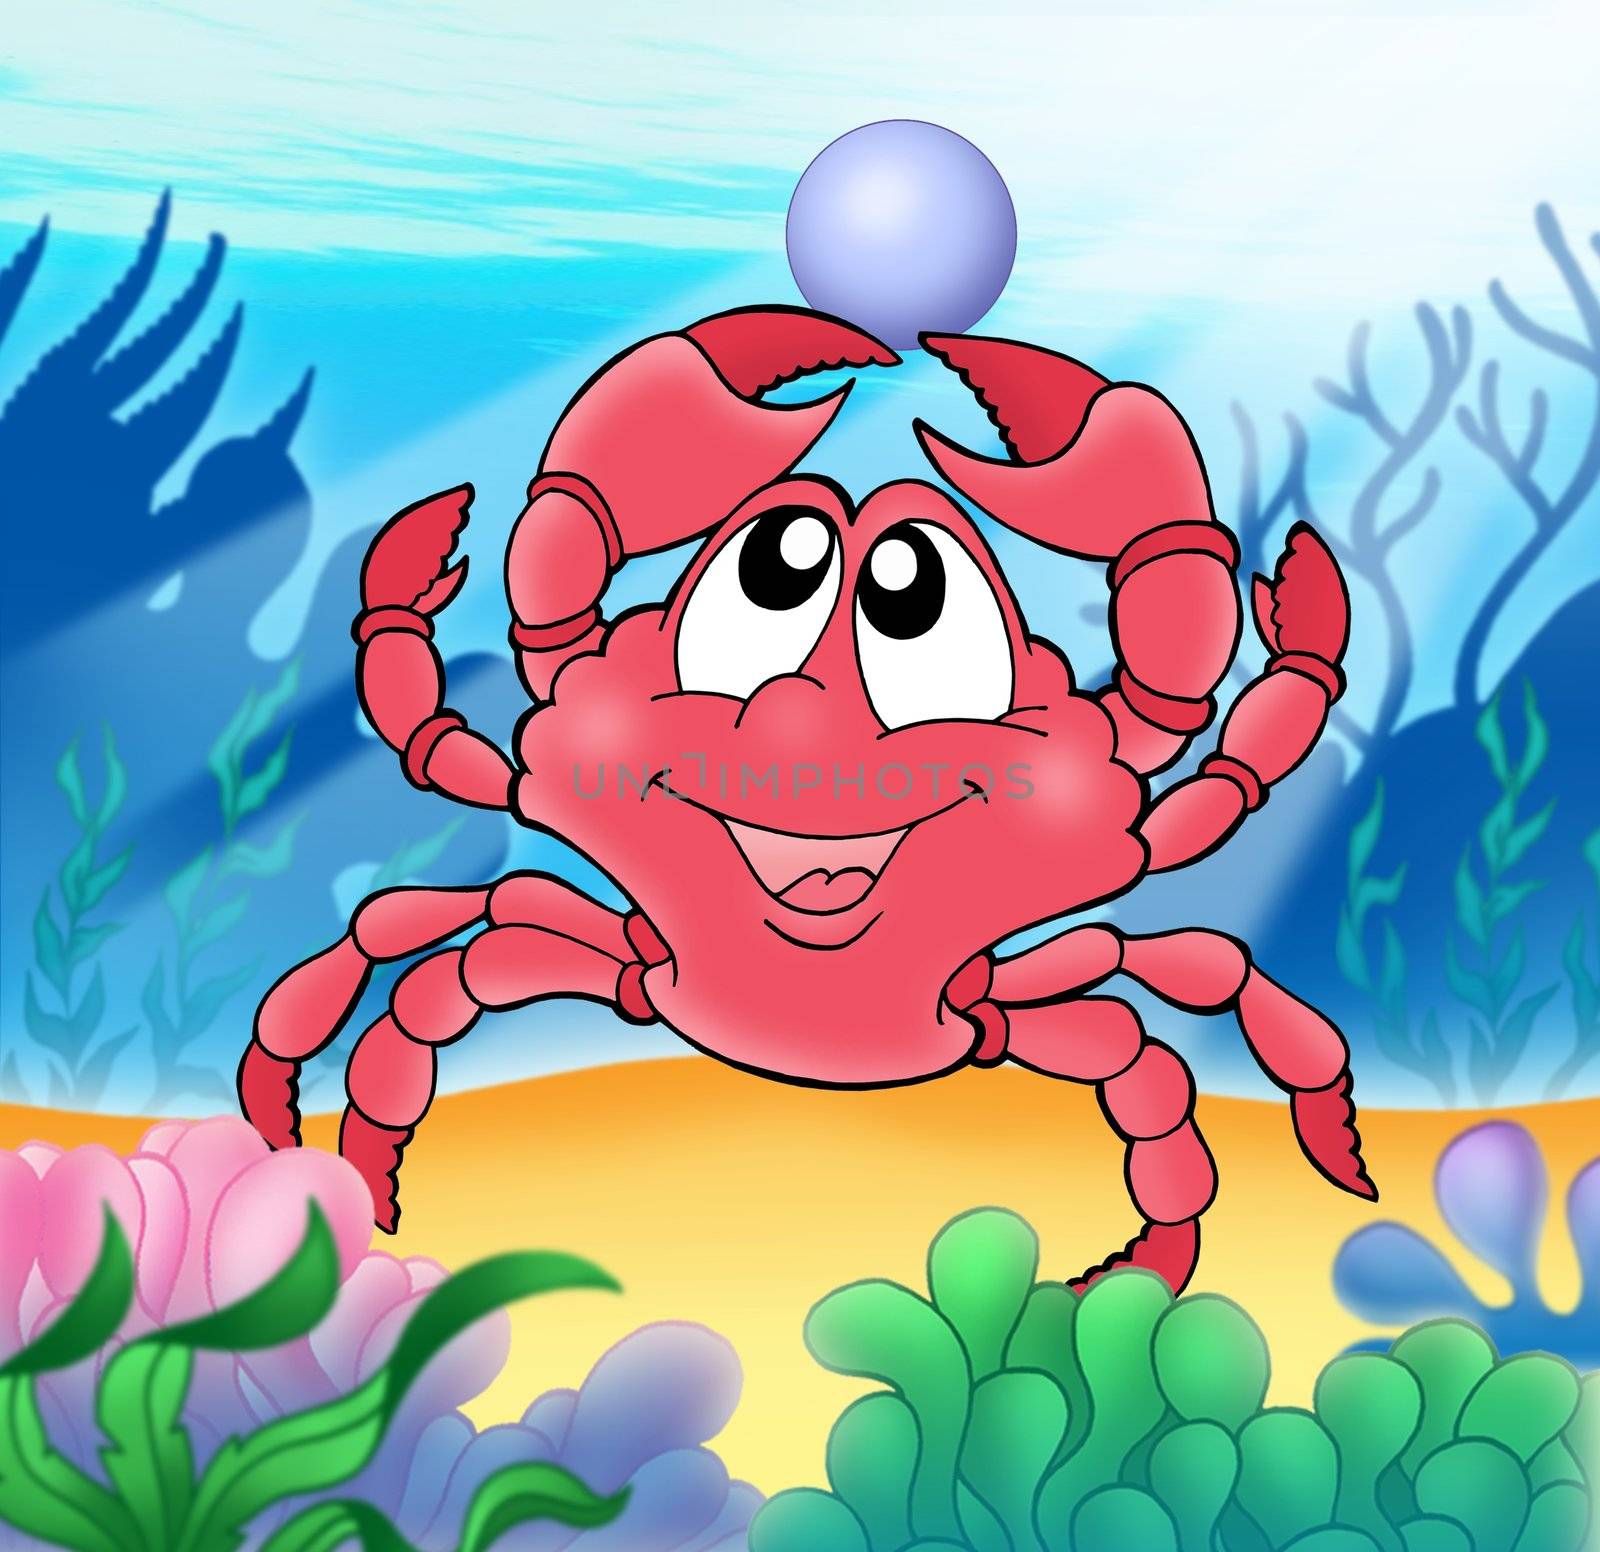 Cute crab with pearl - color illustration.